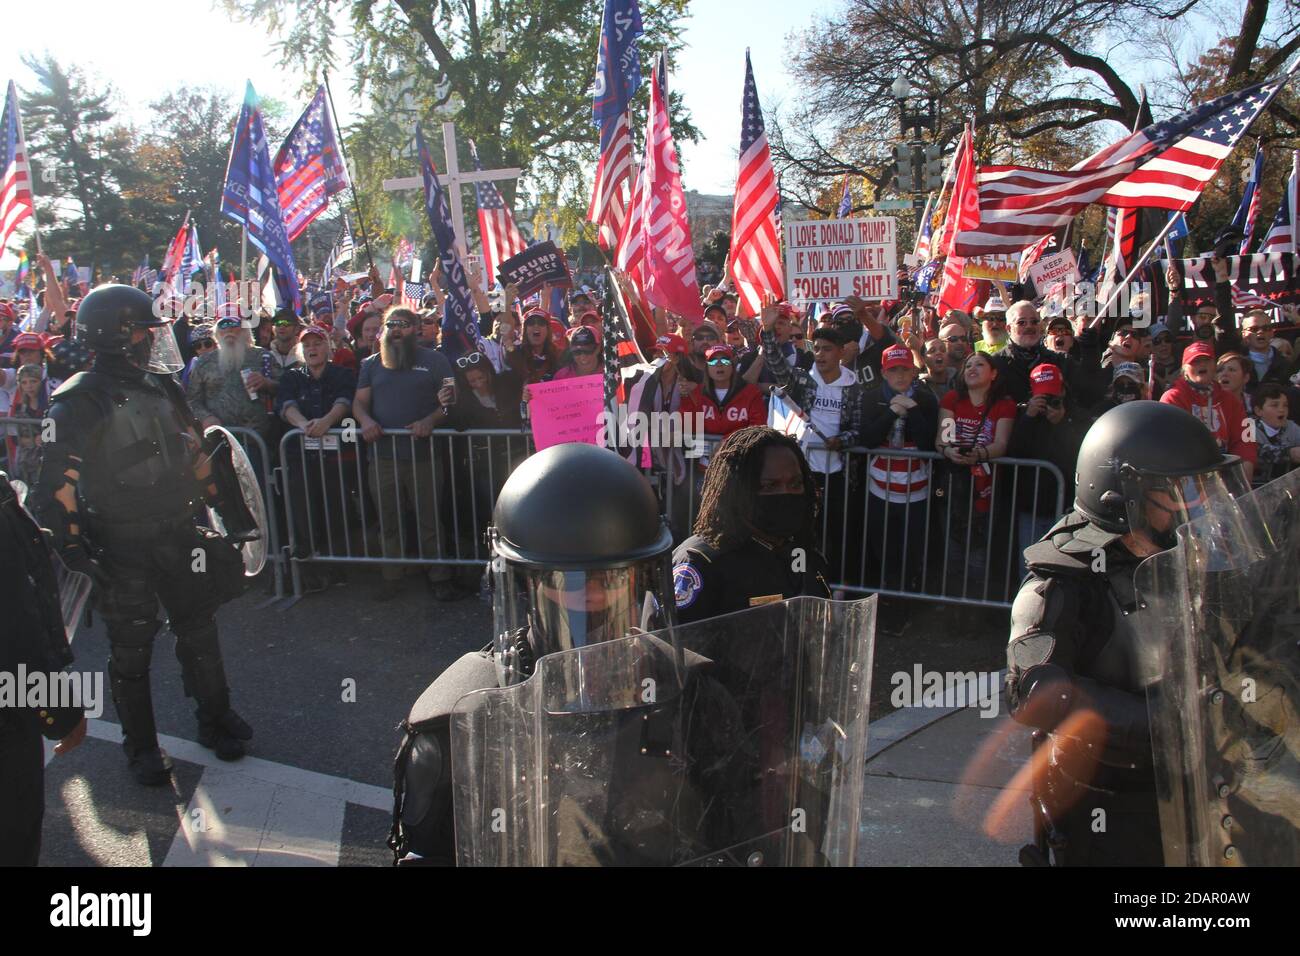 Washington Dc, USA. 14th Nov, 2020. (NEW) Trump and Biden Supporters clash at the Supreme Court in Washington DC. November 14, 2020, Washington DC, Maryland, USA: Trump and Biden supporters clash at the Supreme Court in Washington DC during a TrumpÃ¢â‚¬â„¢s MAGA Million March to show their support for Trump and protest against the Presidential election result which they claim to be fraudulent. There were some Police Officers to provide security between them .Credit : Niyi Fote /Thenews2. Credit: Niyi Fote/TheNEWS2/ZUMA Wire/Alamy Live News Stock Photo